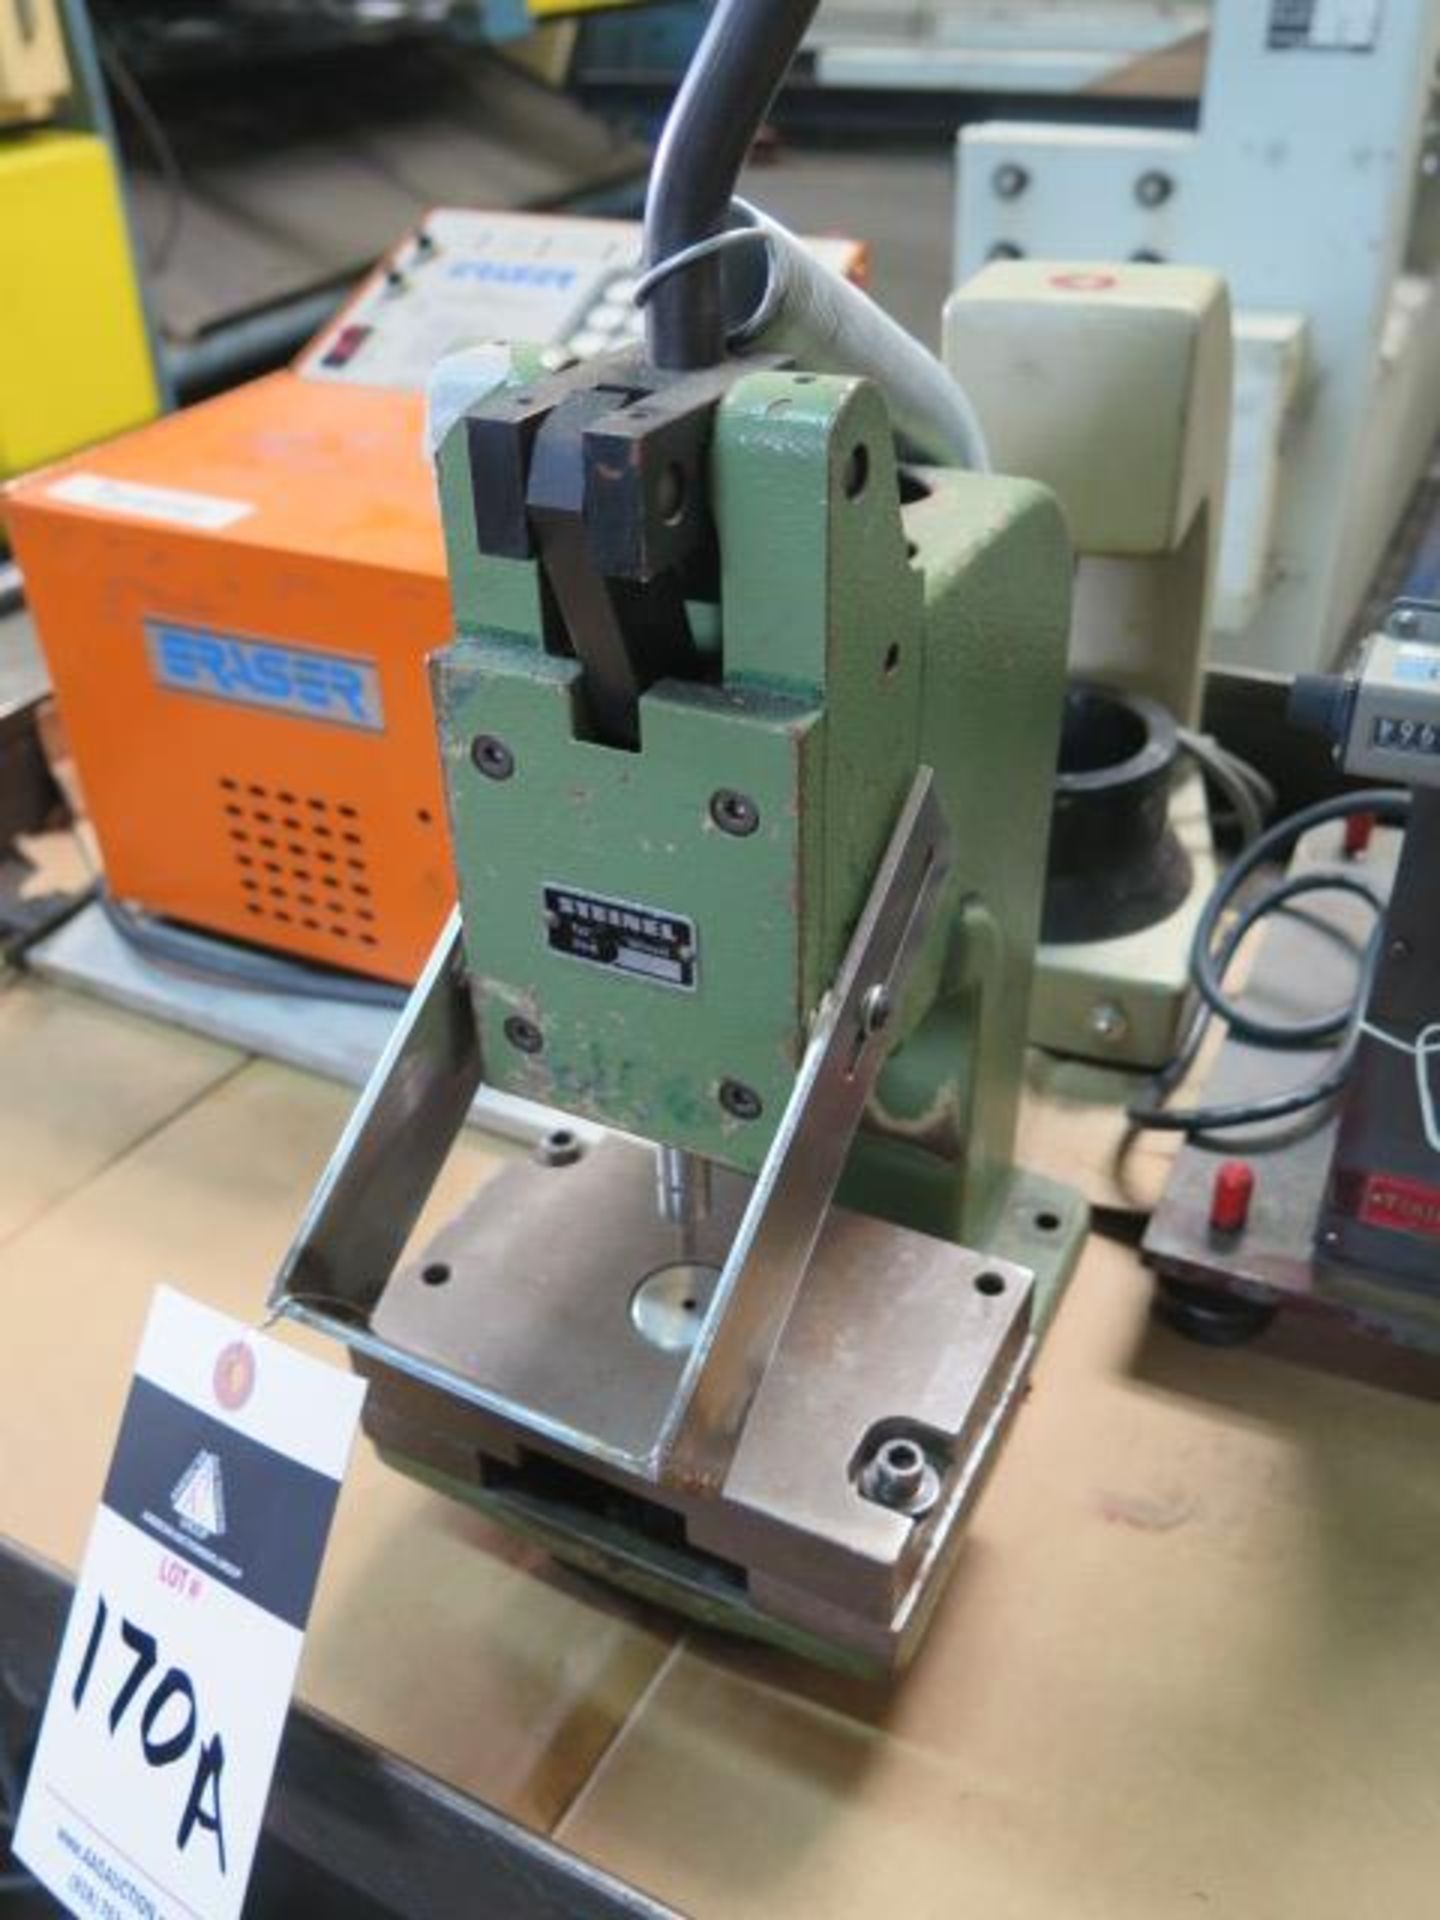 Eraser WC-2 Wire and Tube Cutter, Tinius Olson Testing Machine, Stienel Punch and Shyodu Test devise - Image 4 of 5